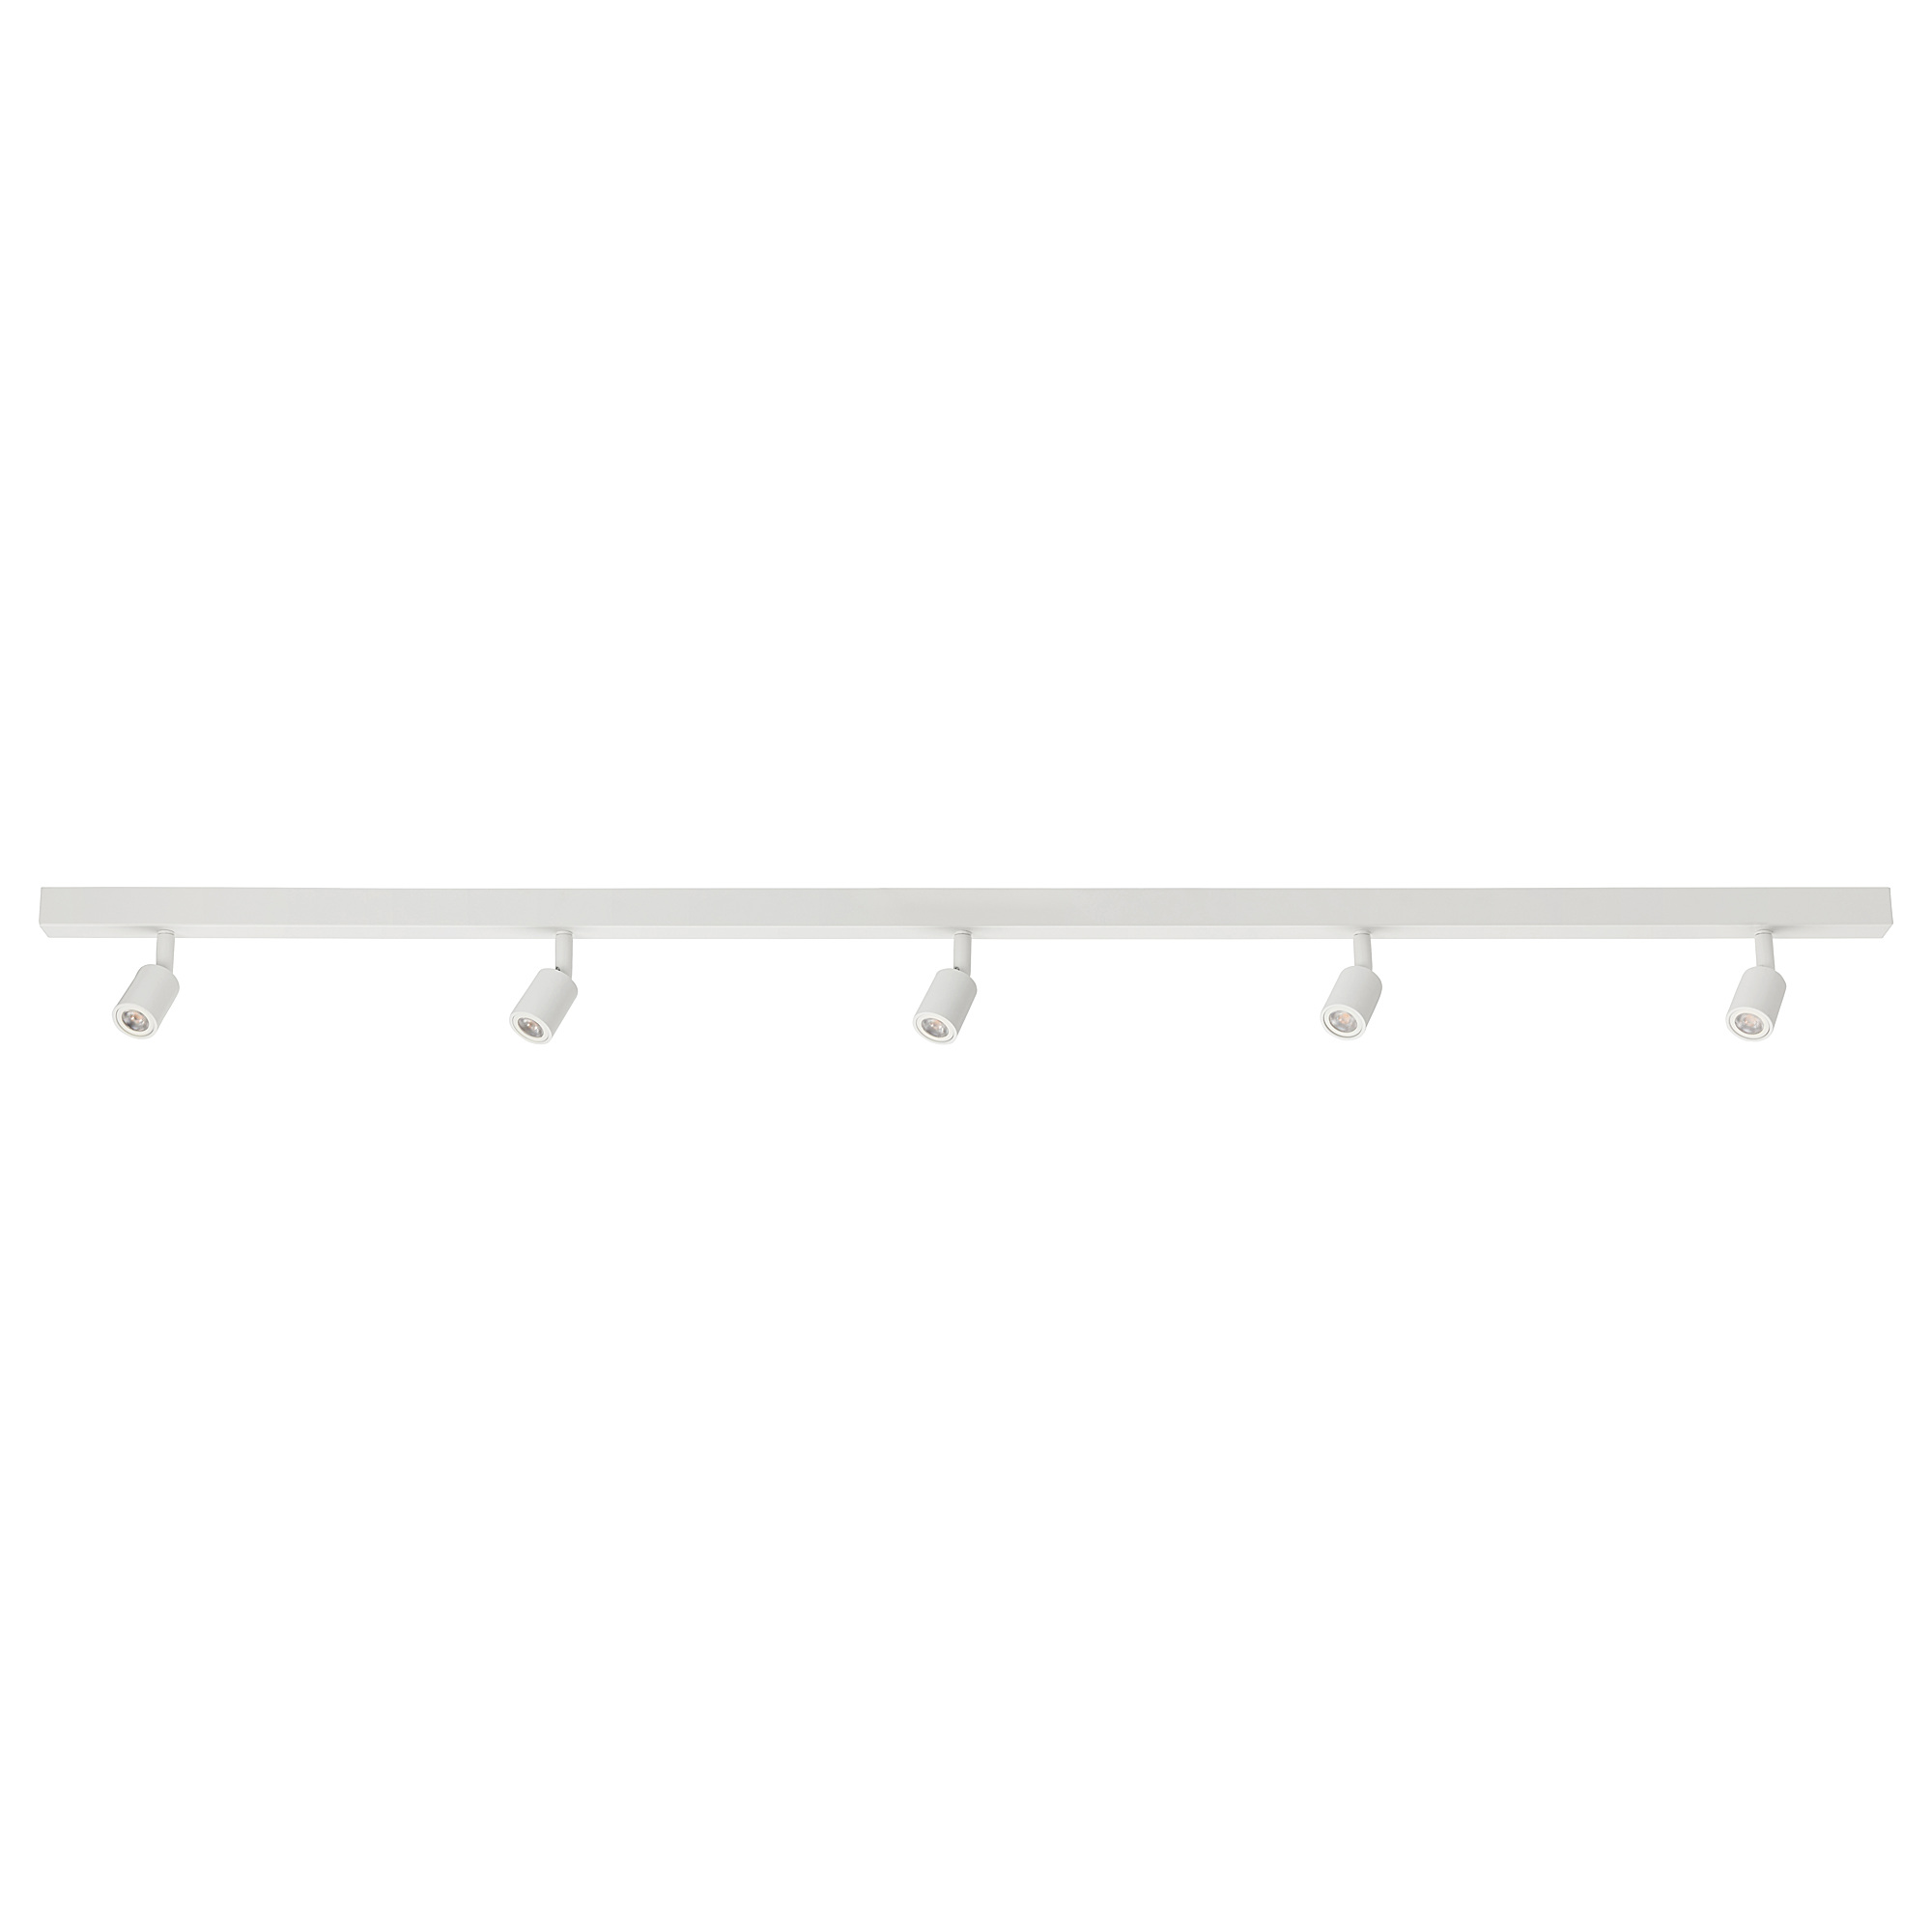 Opposite Subdivide Admission BÄVE - LED ceiling track, 5-spots, white | IKEA Hong Kong and Macau